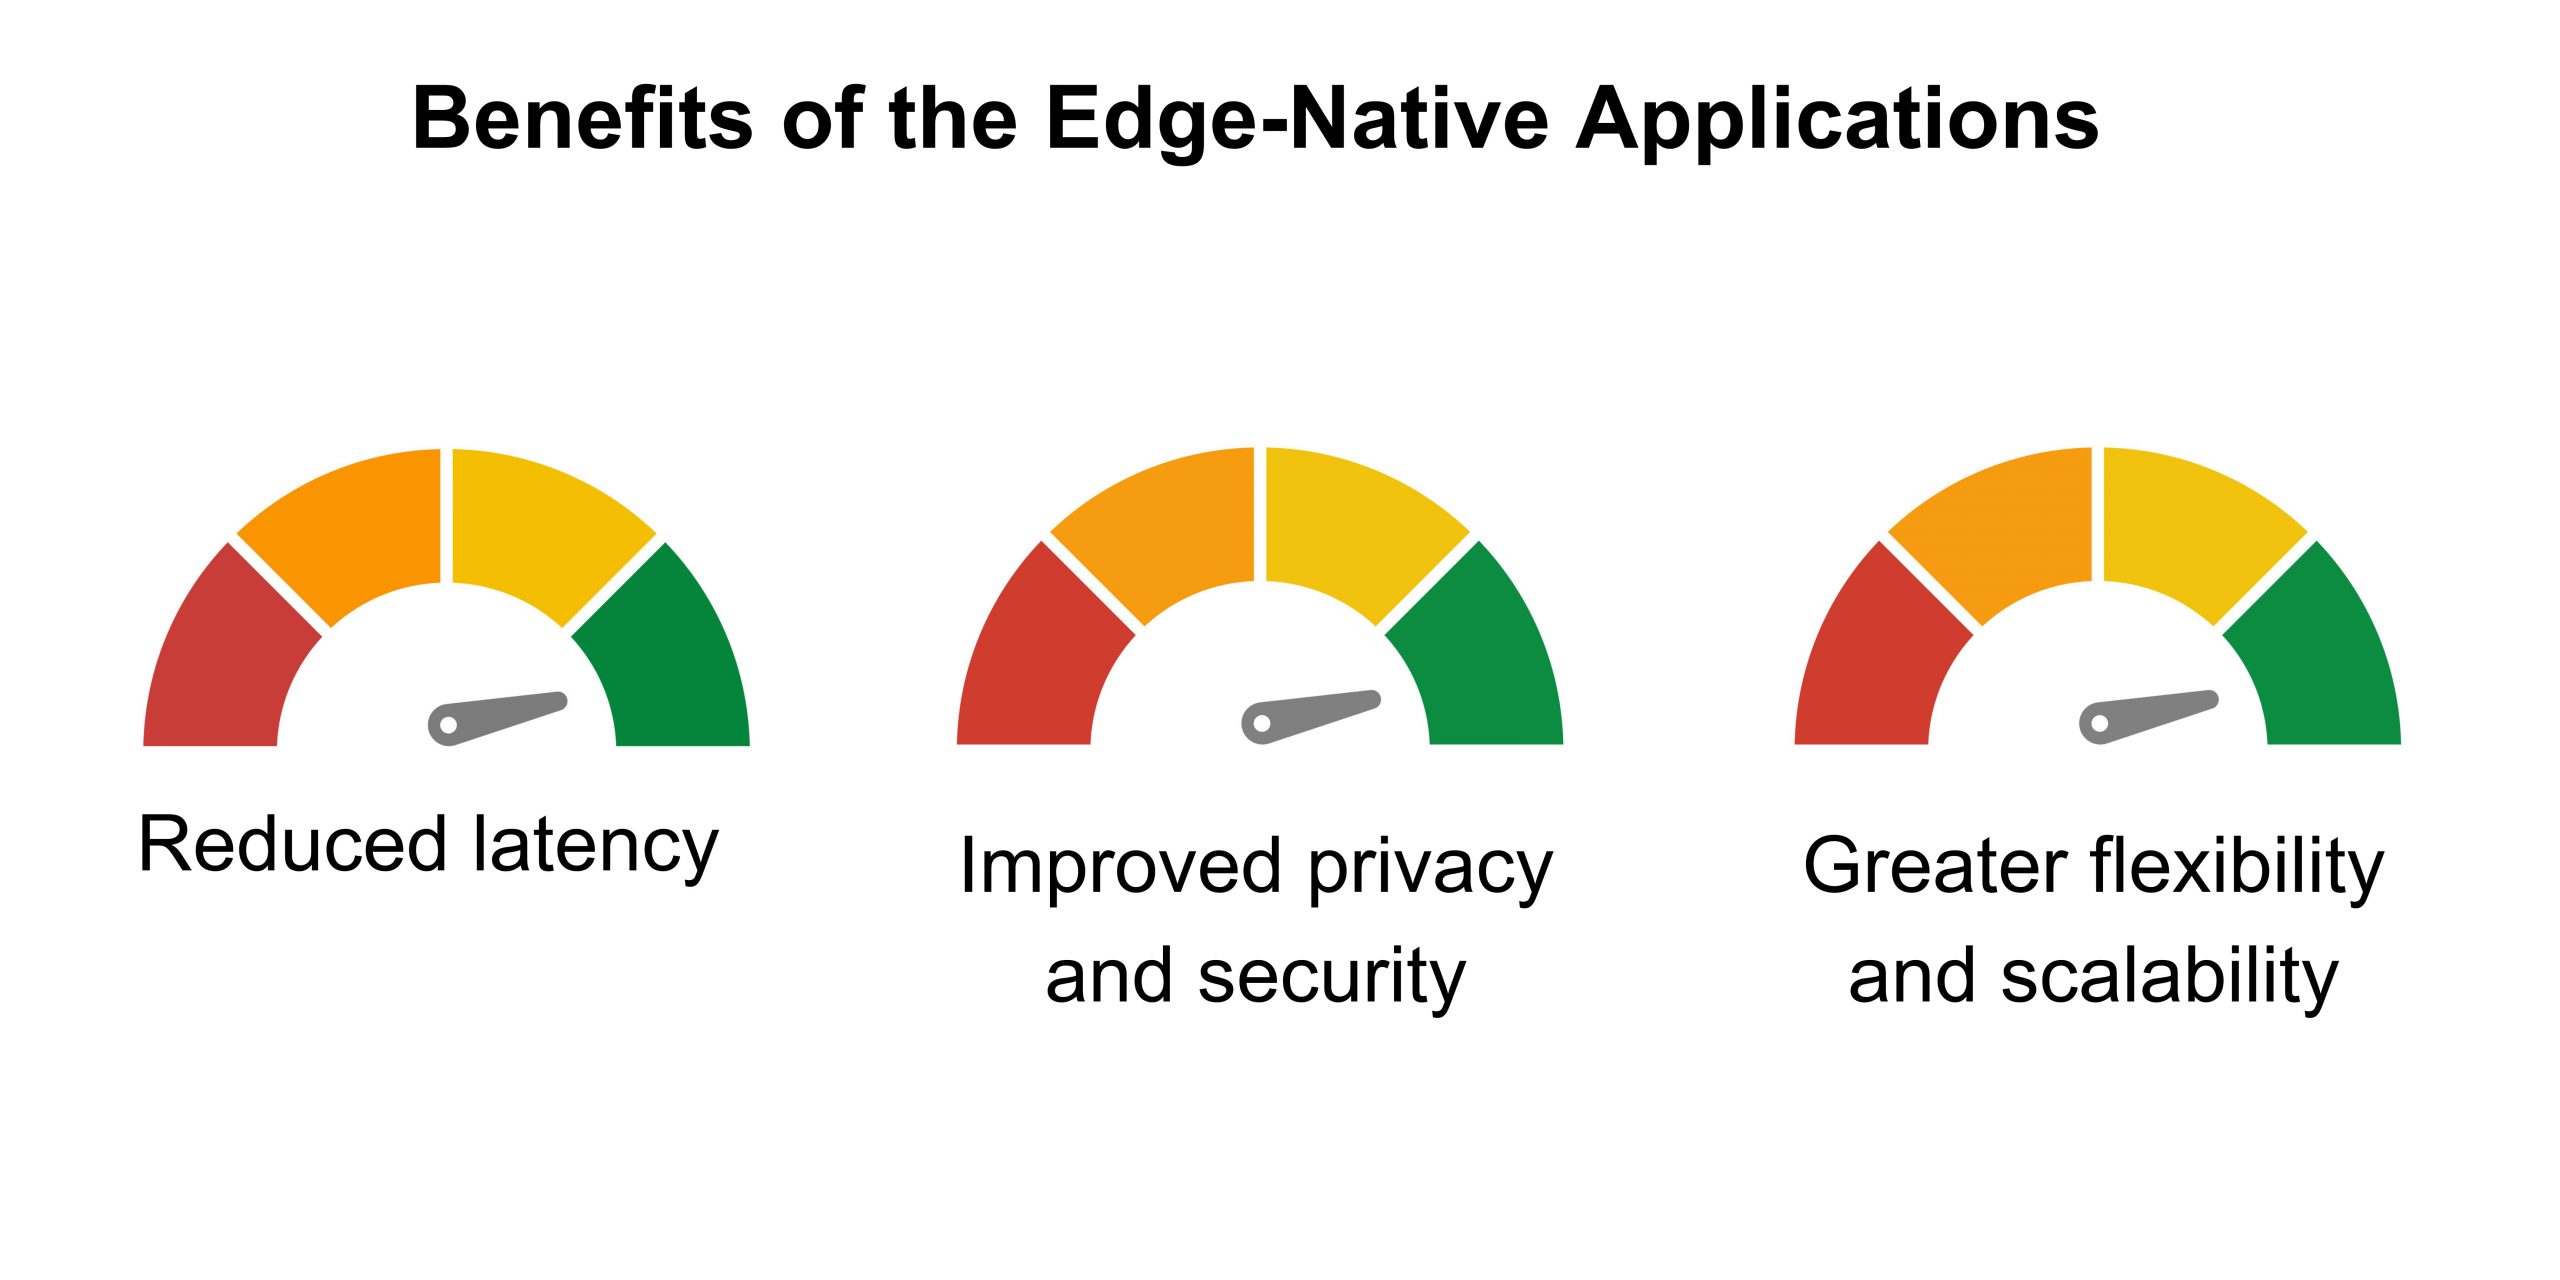 Benefits of Edge-Native applications